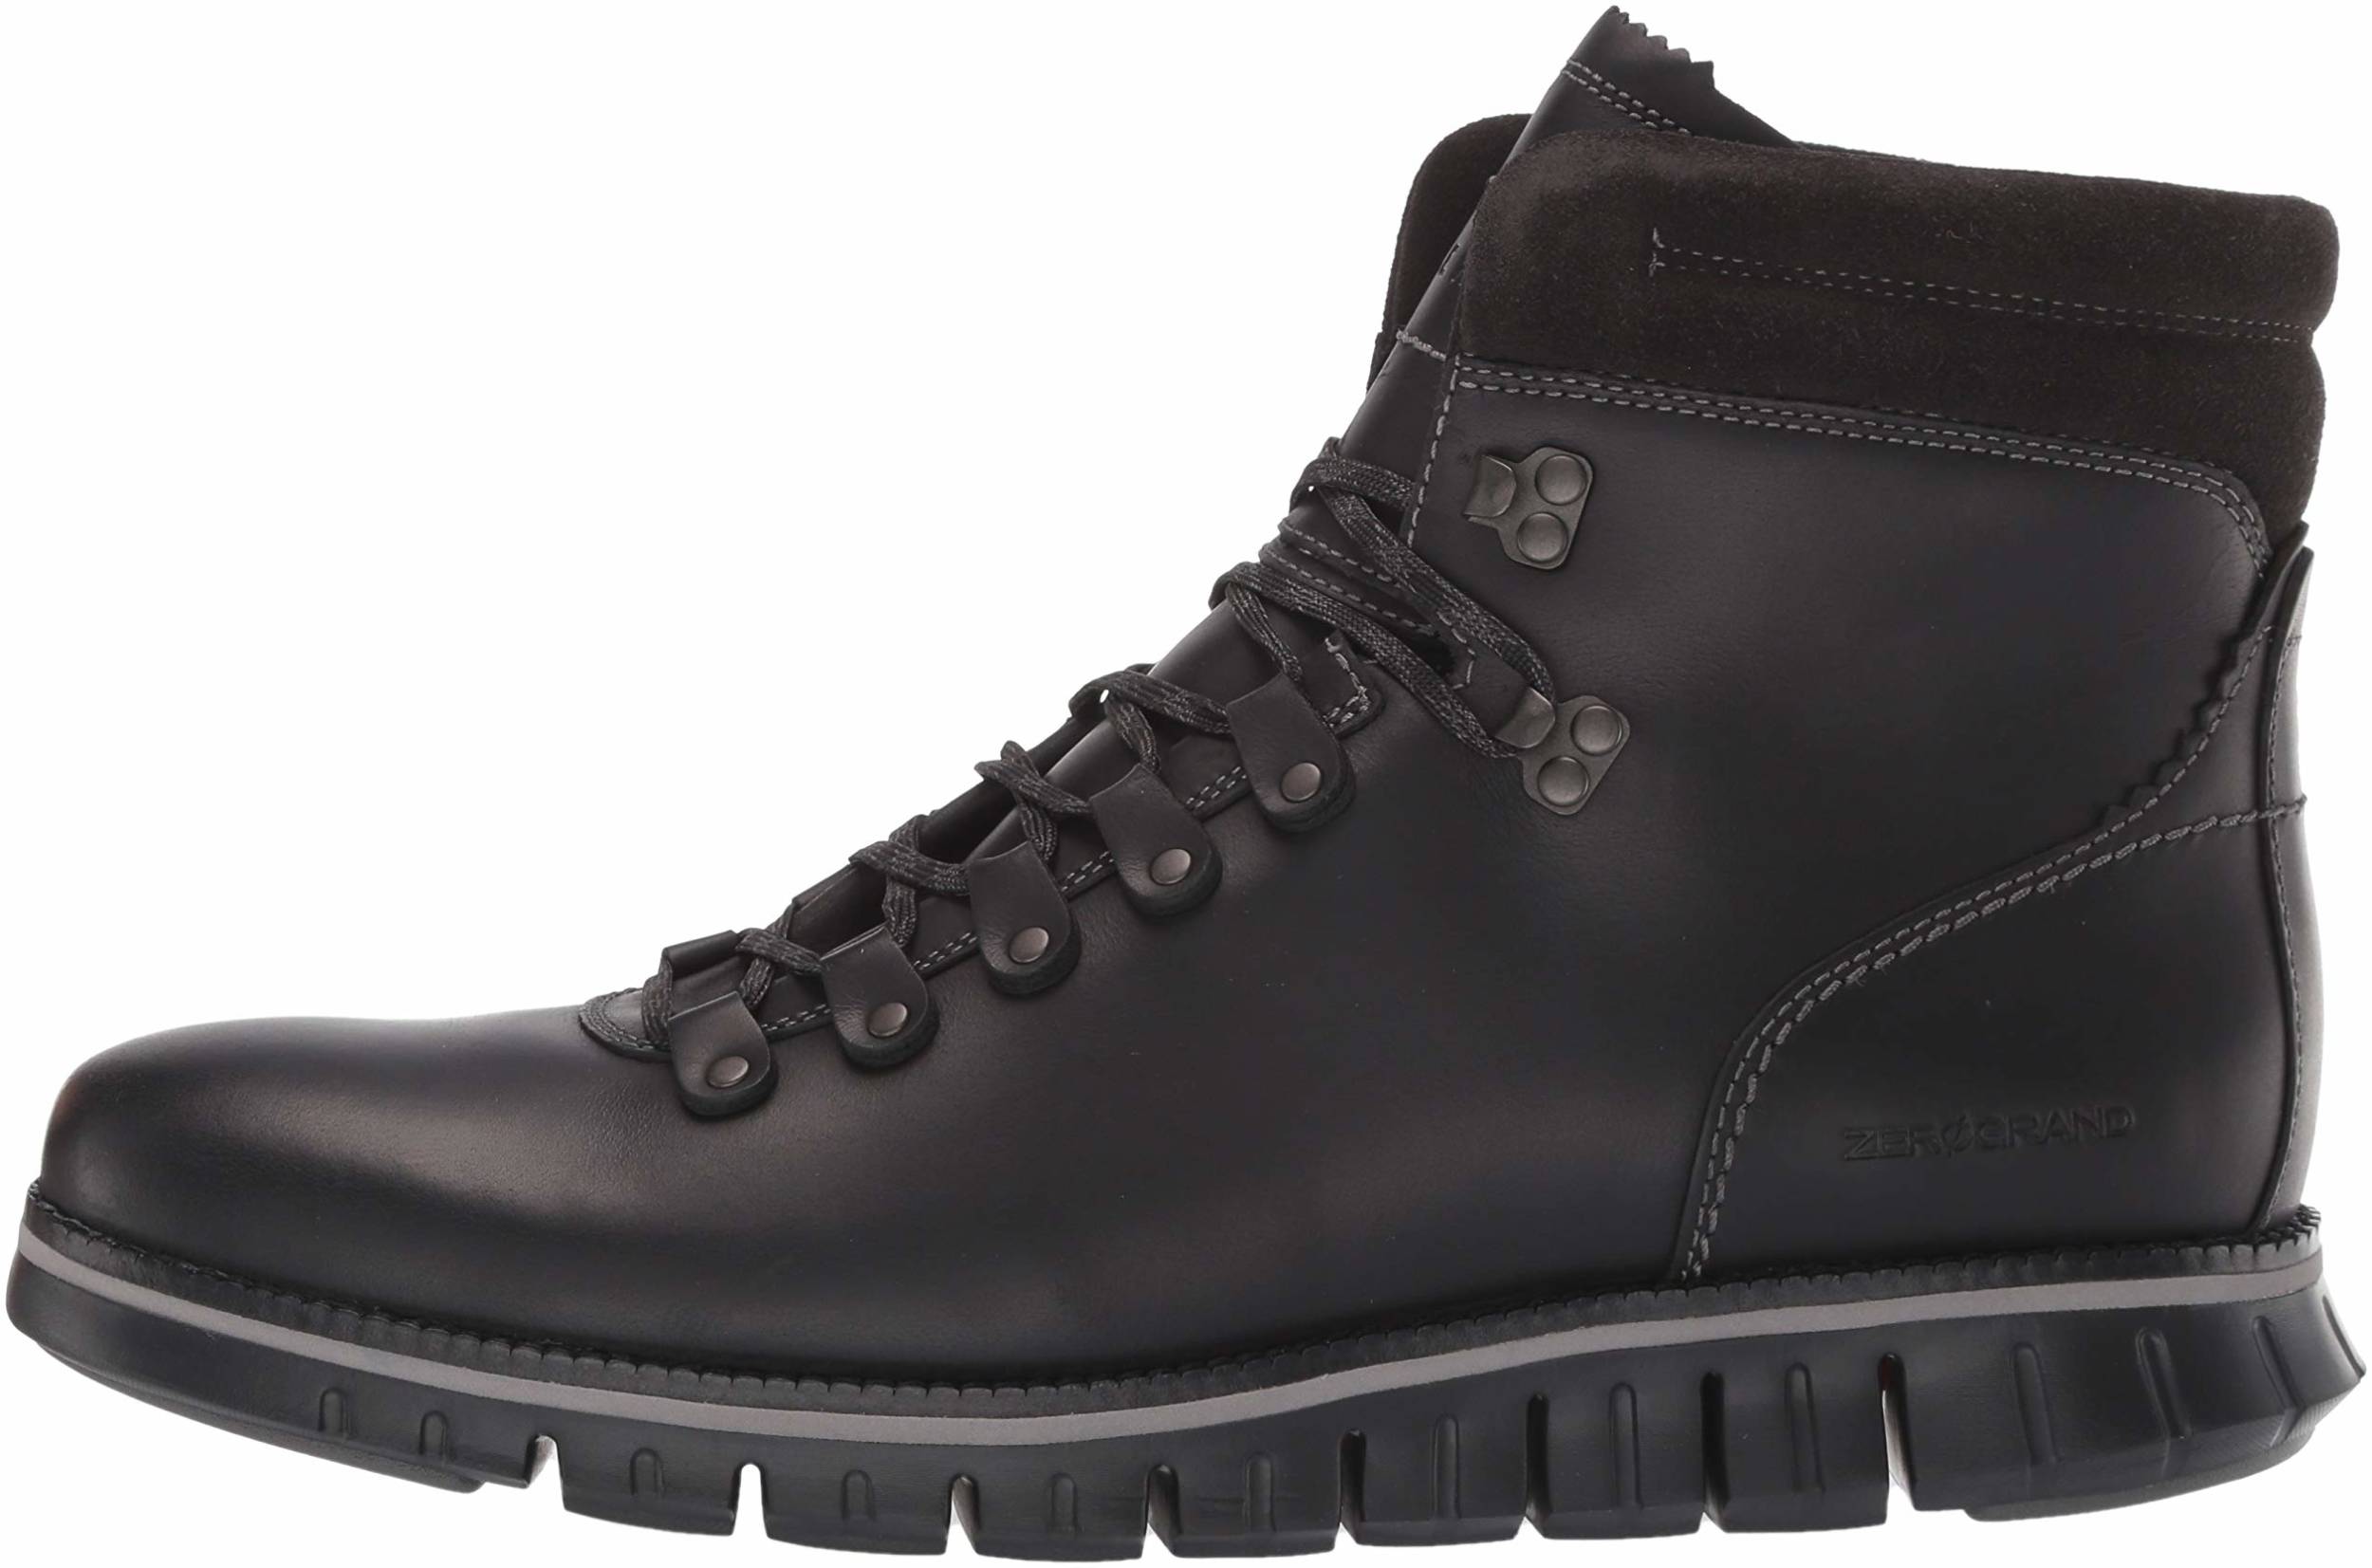 Silicon vehicle Inquire Cole Haan Zerogrand Hiker Boot Review 2022, Facts, Deals ($75) | RunRepeat